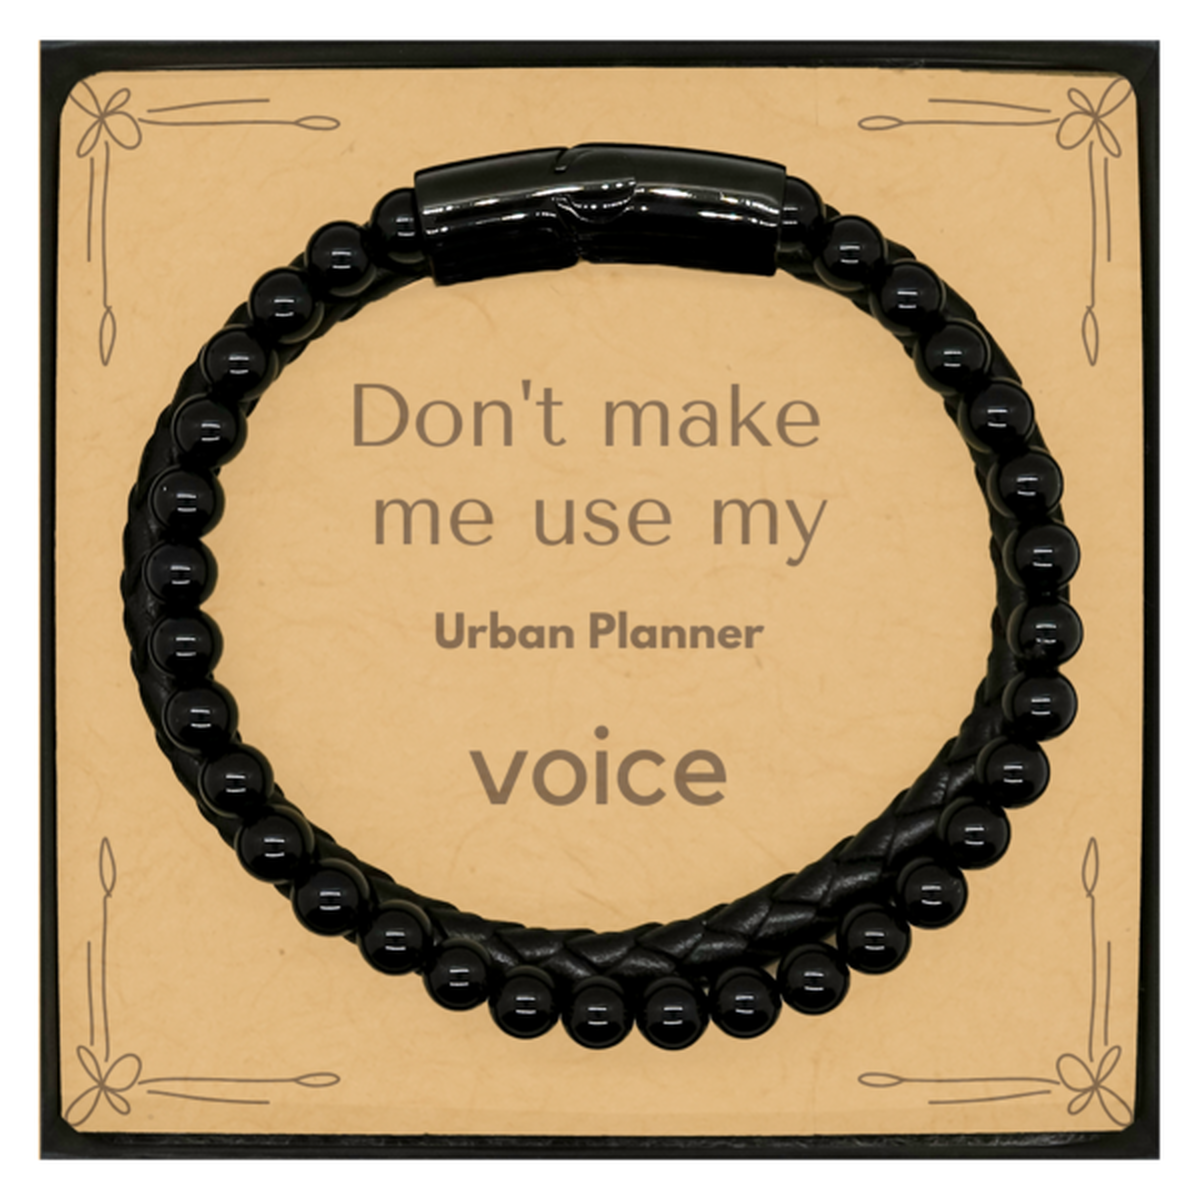 Don't make me use my Urban Planner voice, Sarcasm Urban Planner Card Gifts, Christmas Urban Planner Stone Leather Bracelets Birthday Unique Gifts For Urban Planner Coworkers, Men, Women, Colleague, Friends